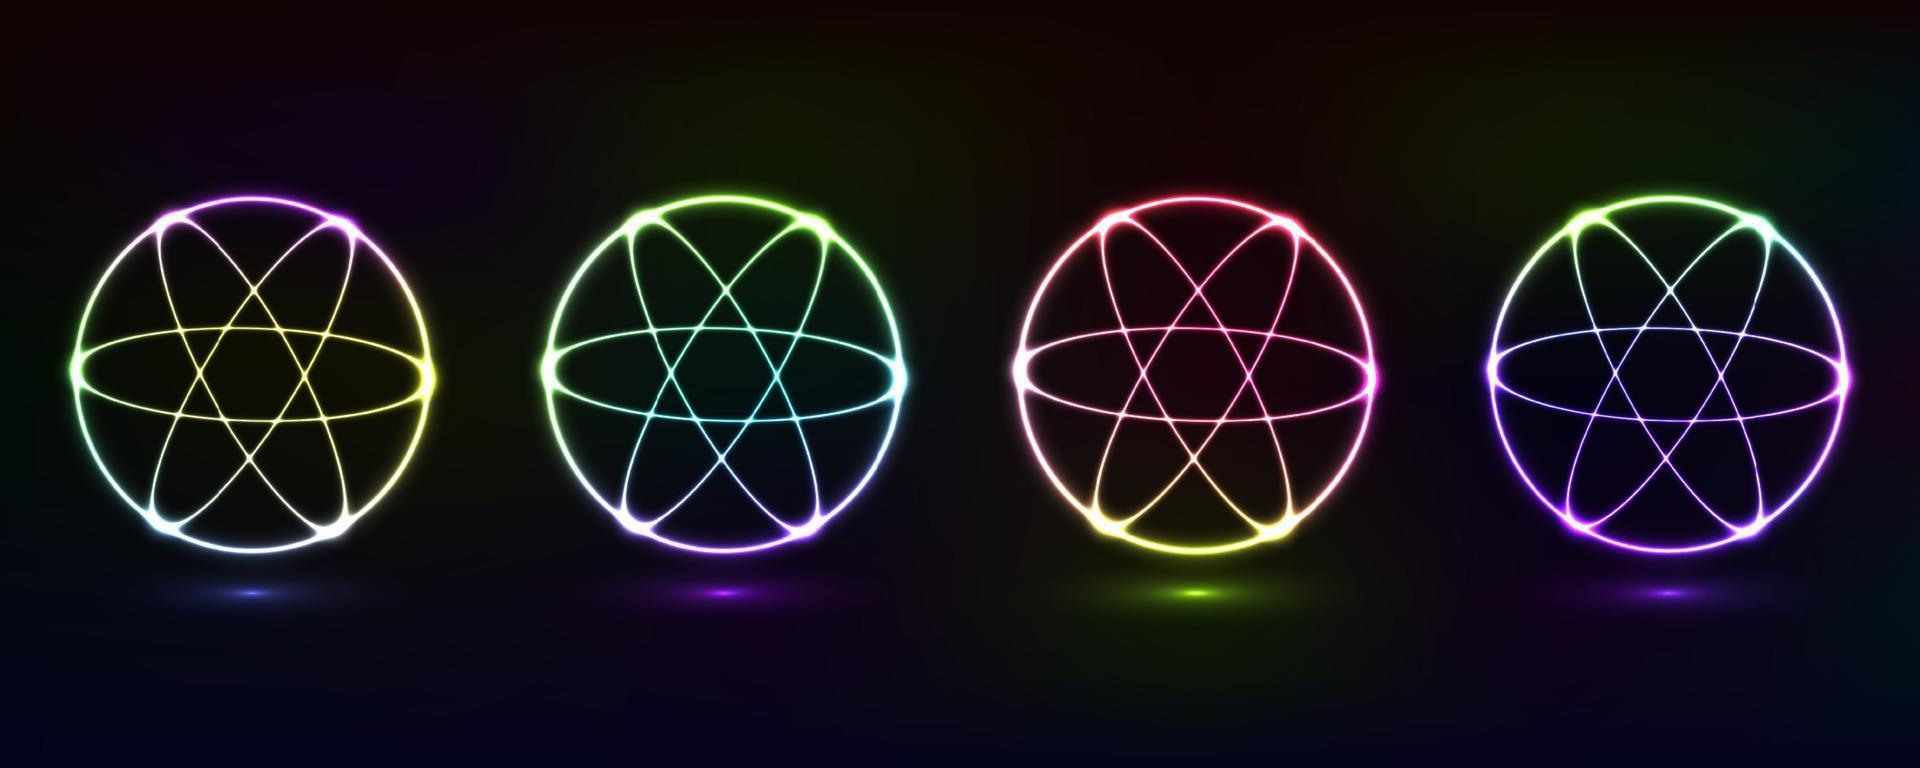 Abstract cosmic dynamic color circle background with glowing neon lighting on dark background vector